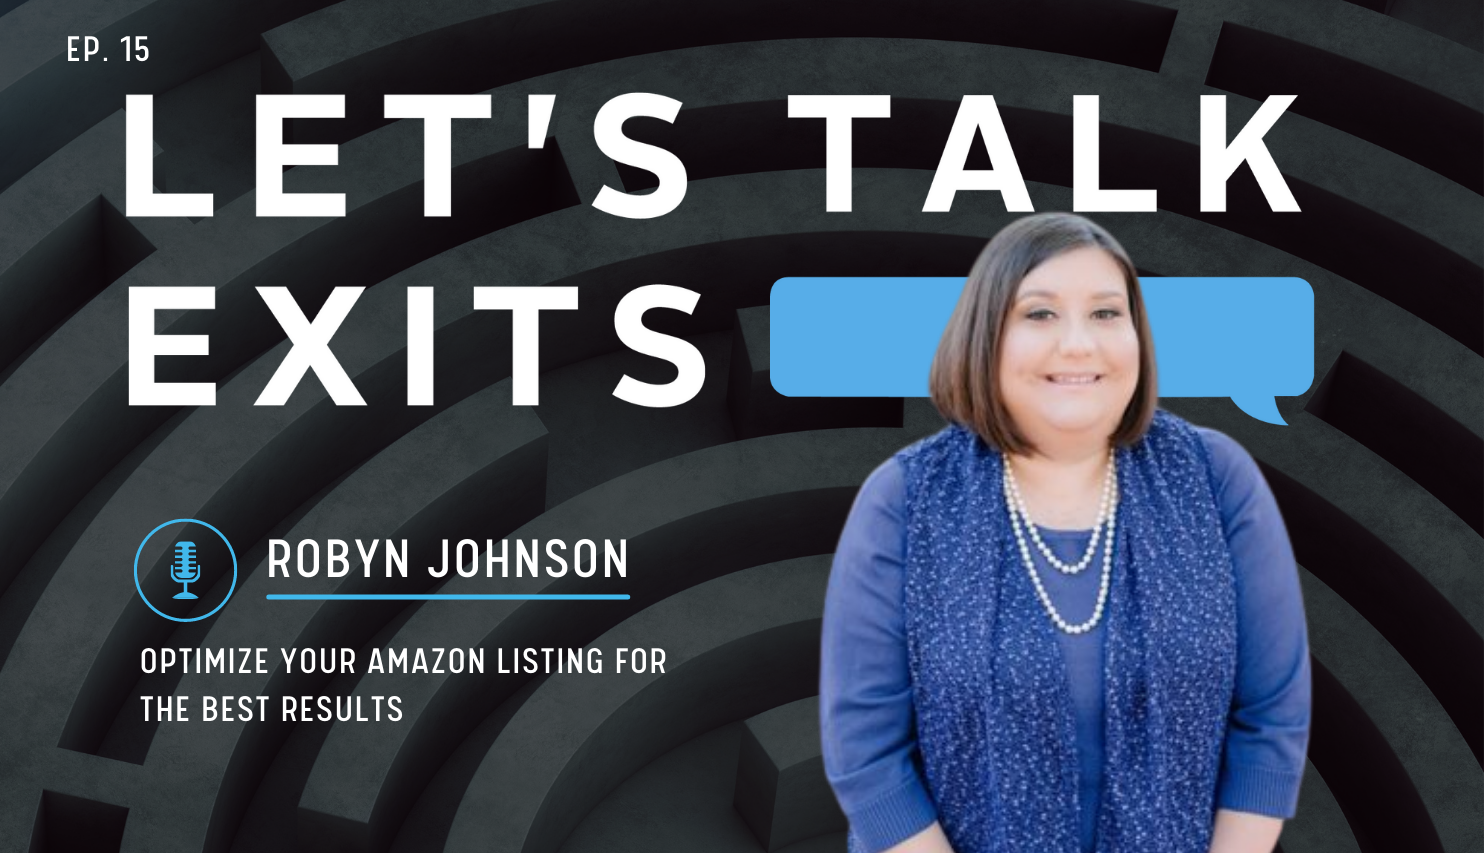 Optimize Your Amazon Listing For the Best Results with Robyn Johnson